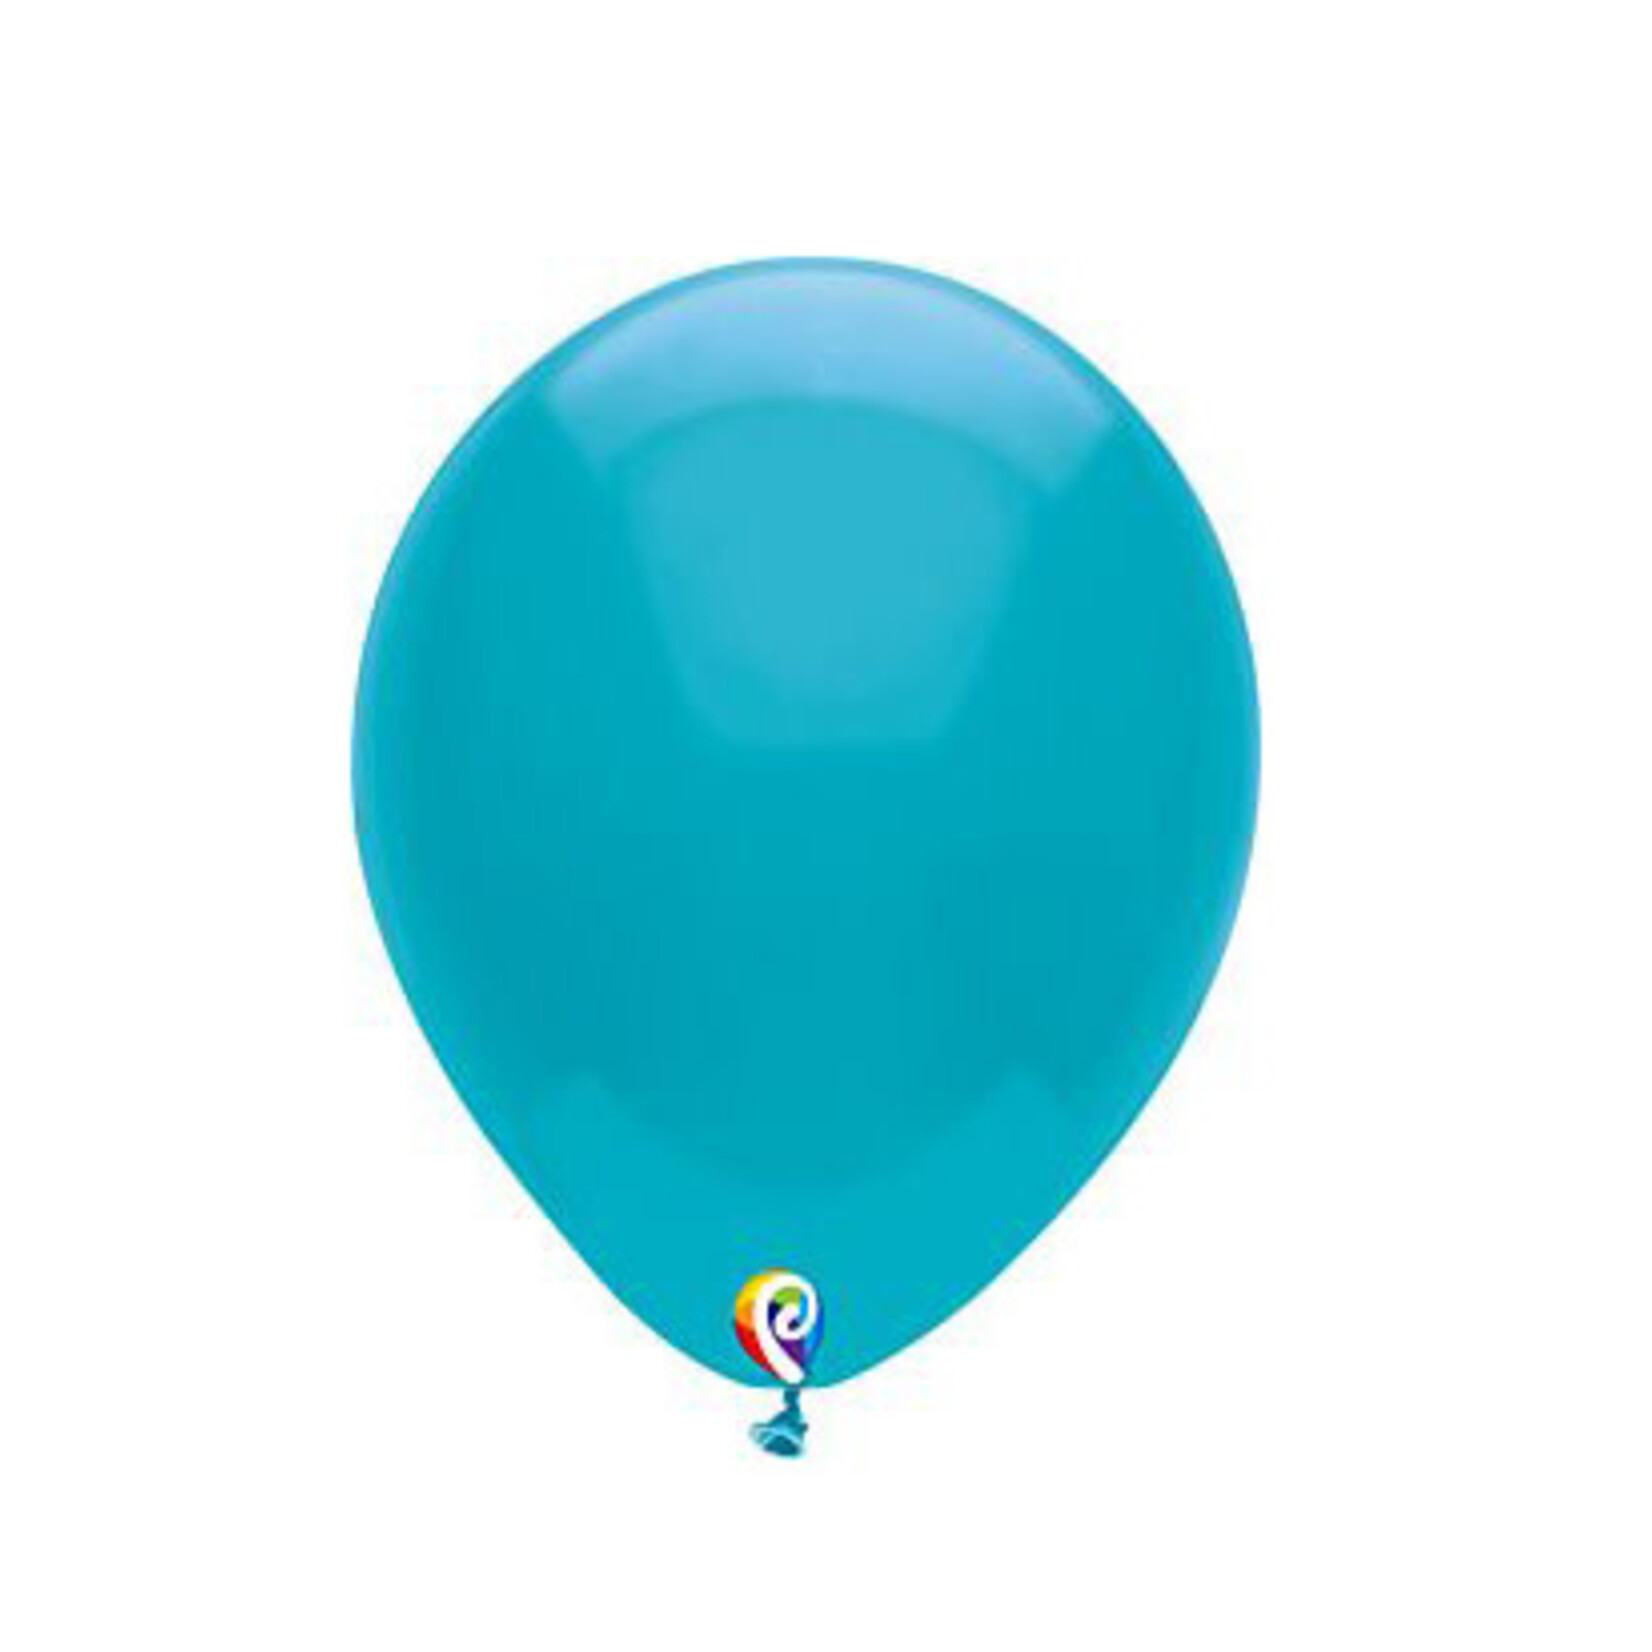 Funsational 12" Turquoise Latex Balloons - 15ct.